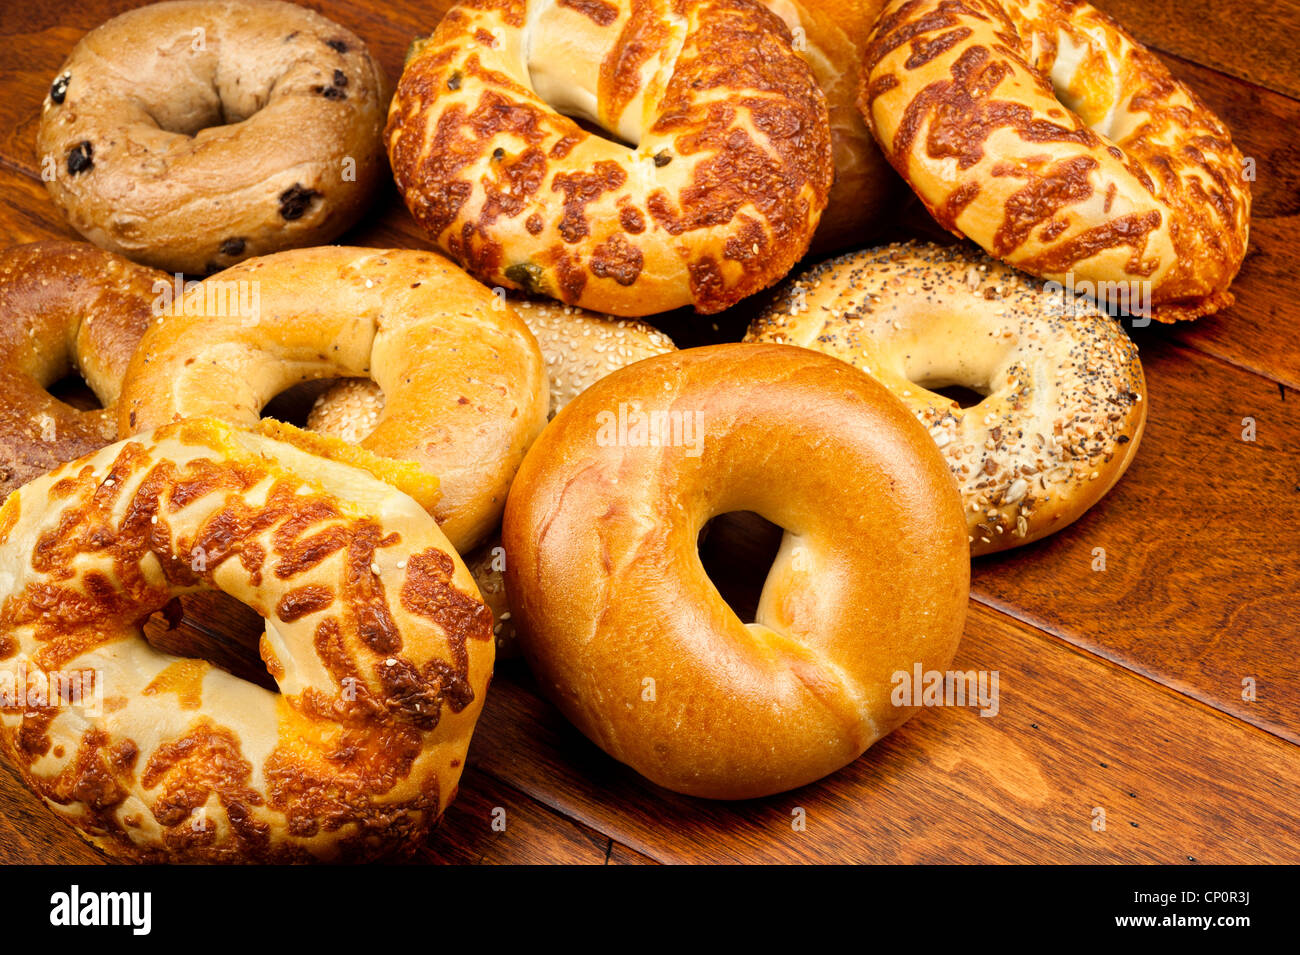 An assortment of fresh bagels on a wooden table Stock Photo